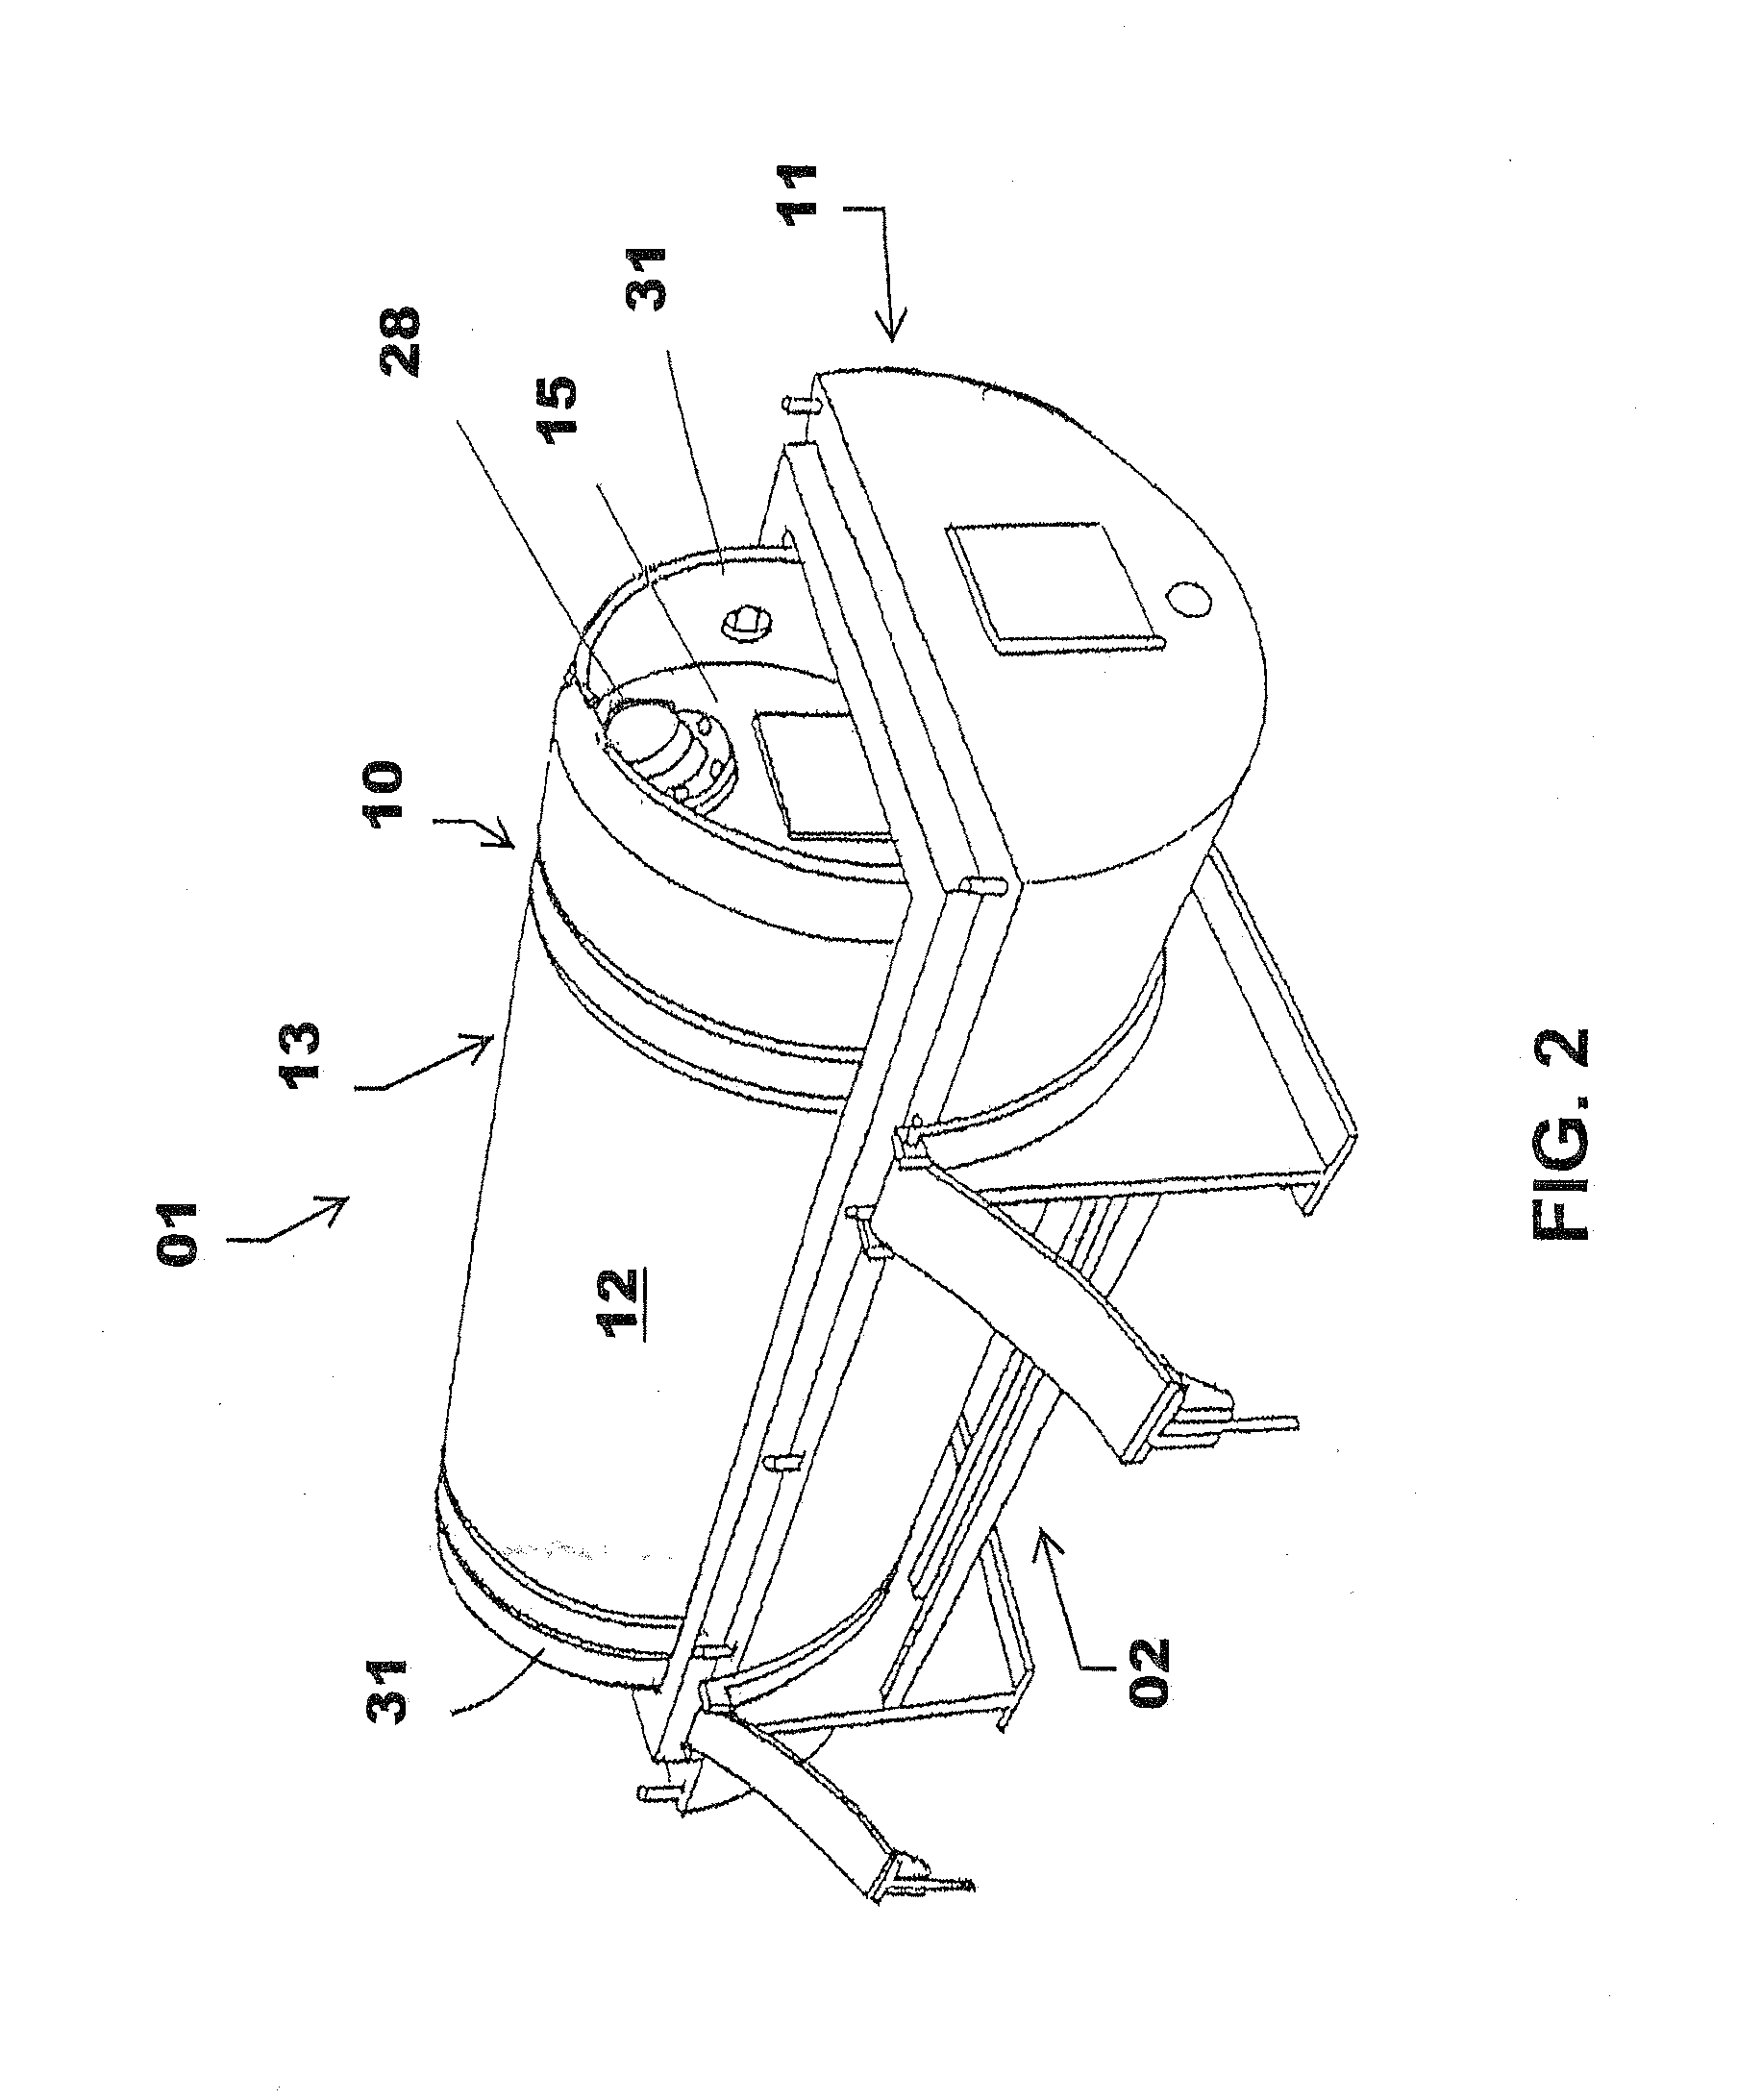 System for storage and transport of uranium hexafluoride